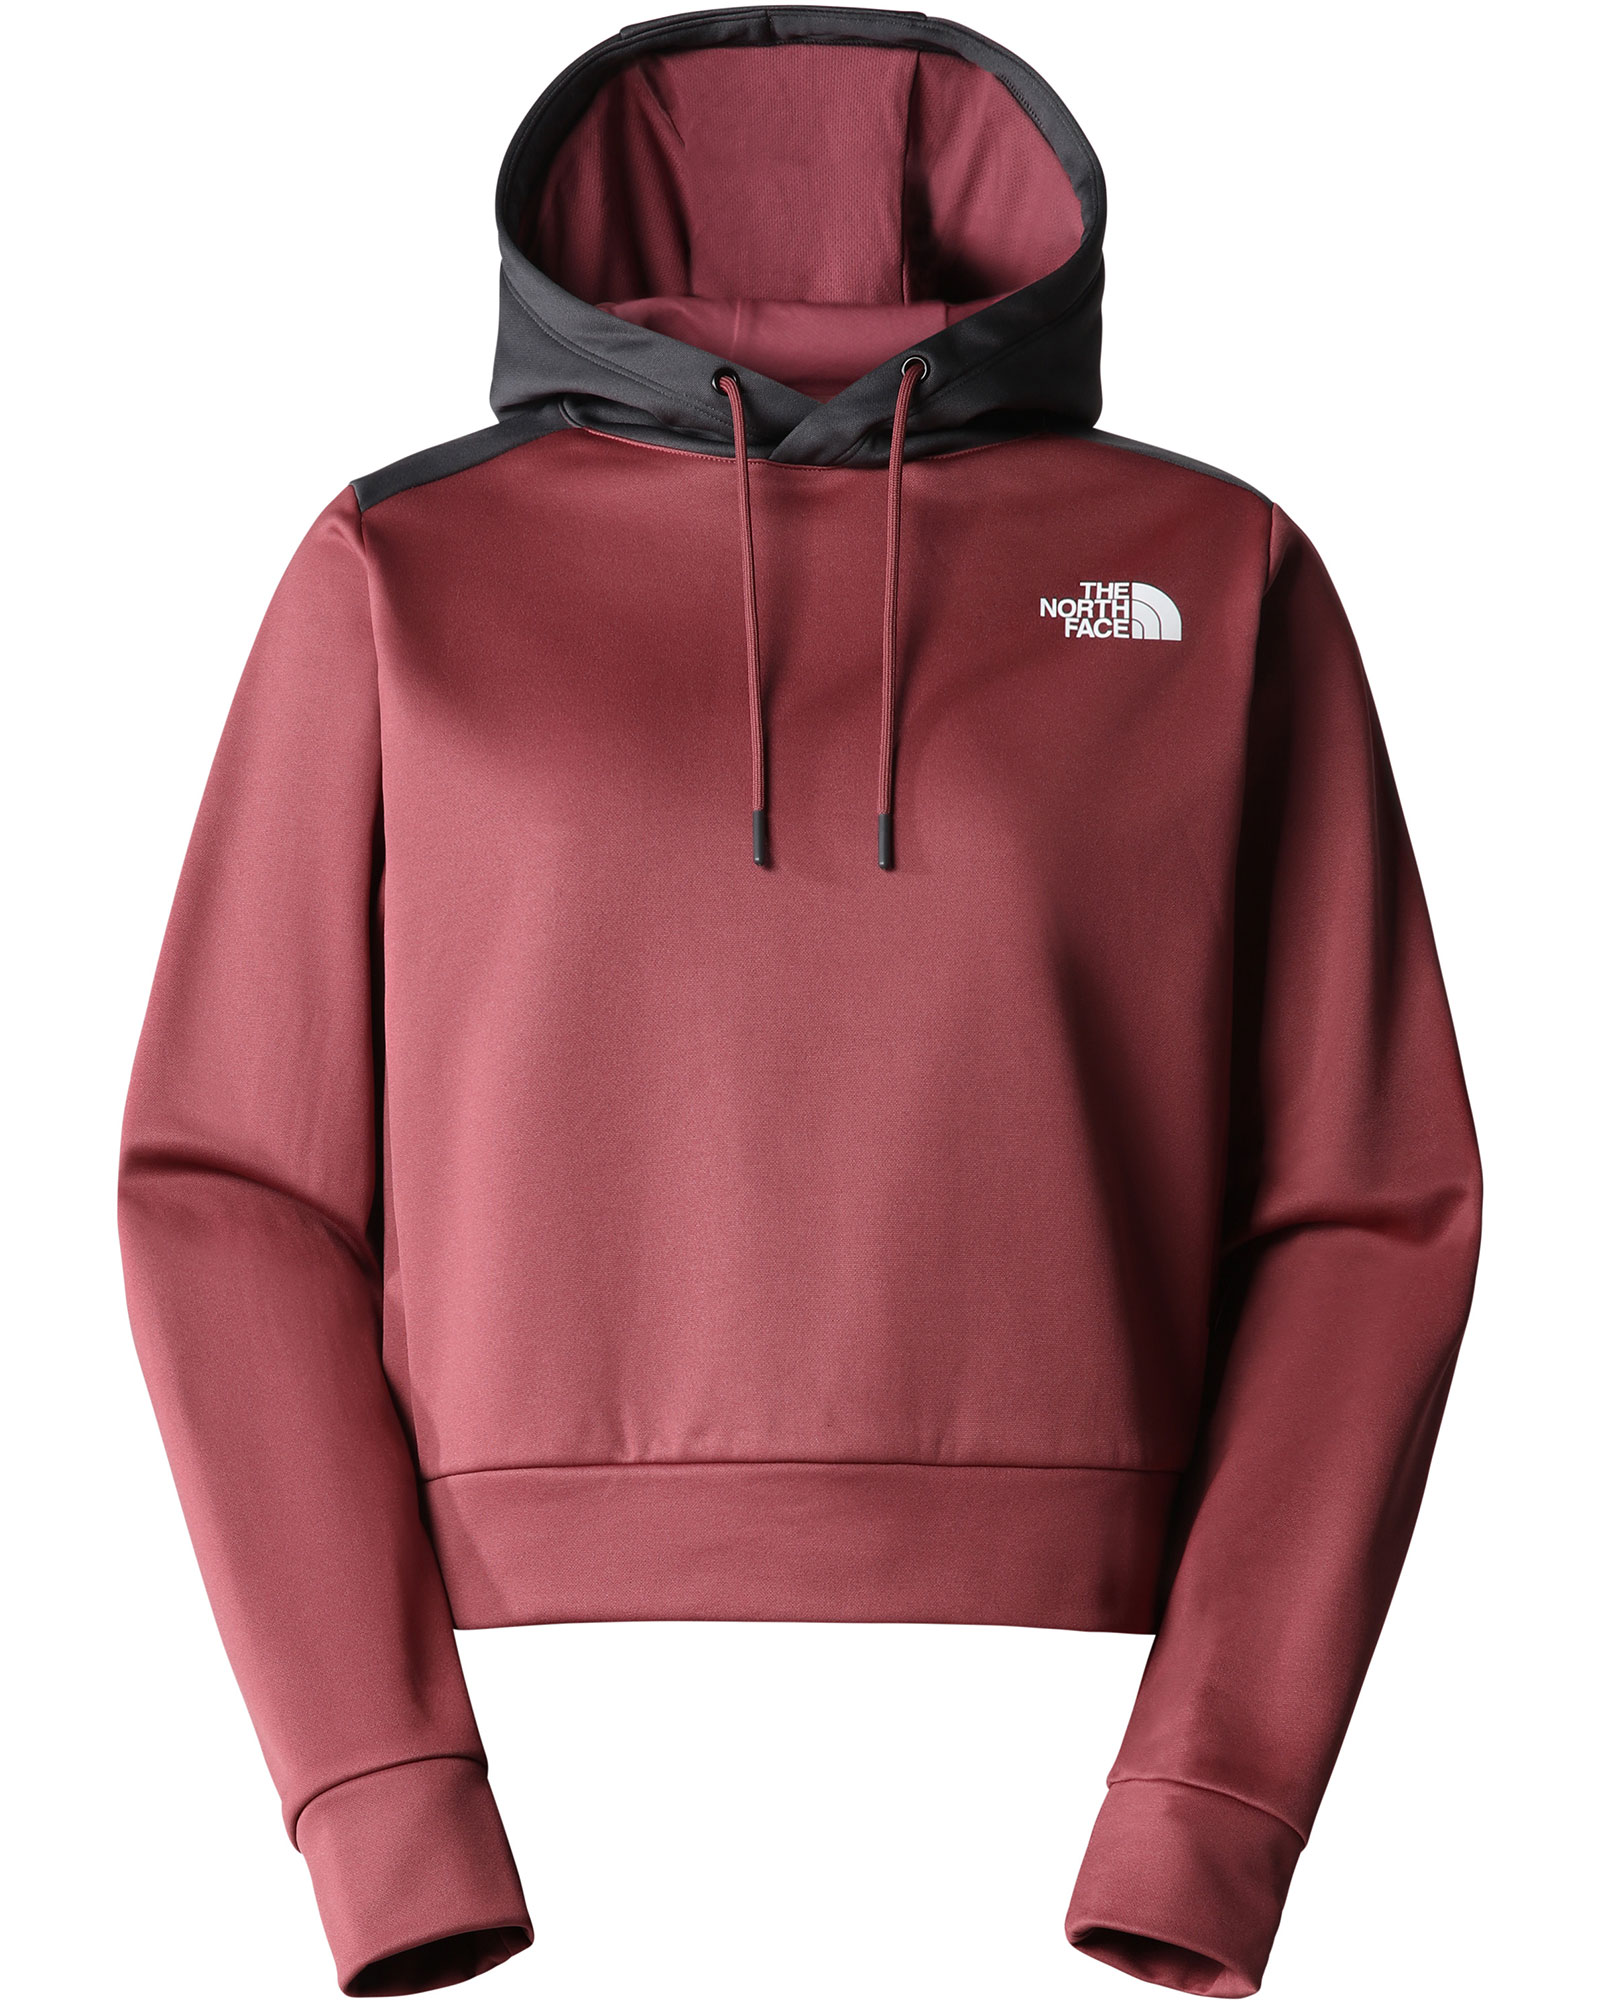 The North Face Reaxion Women’s Fleece Pullover Hoodie - Wild Ginger L